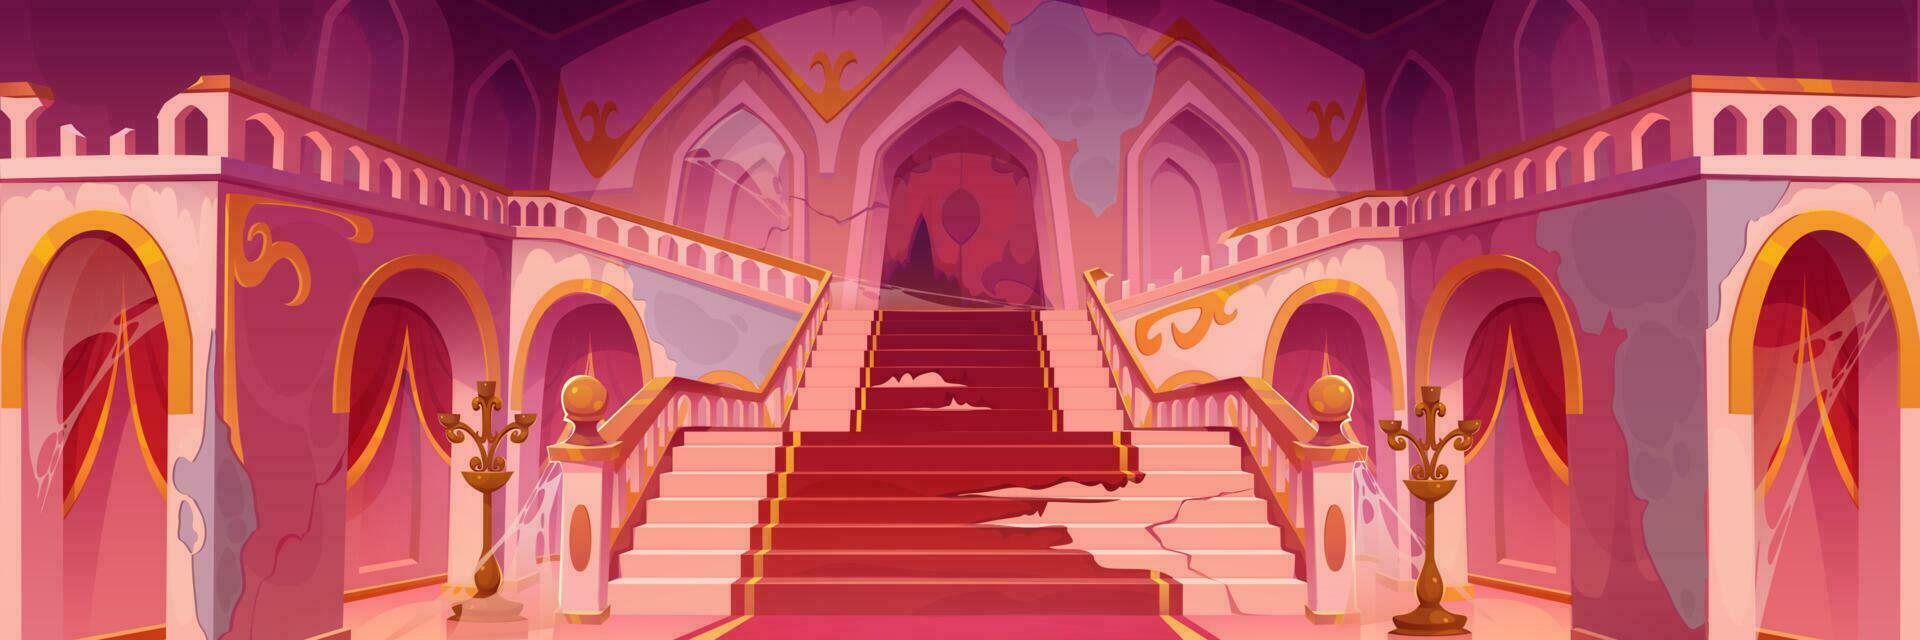 Old messy castle interior with broken stairs vector